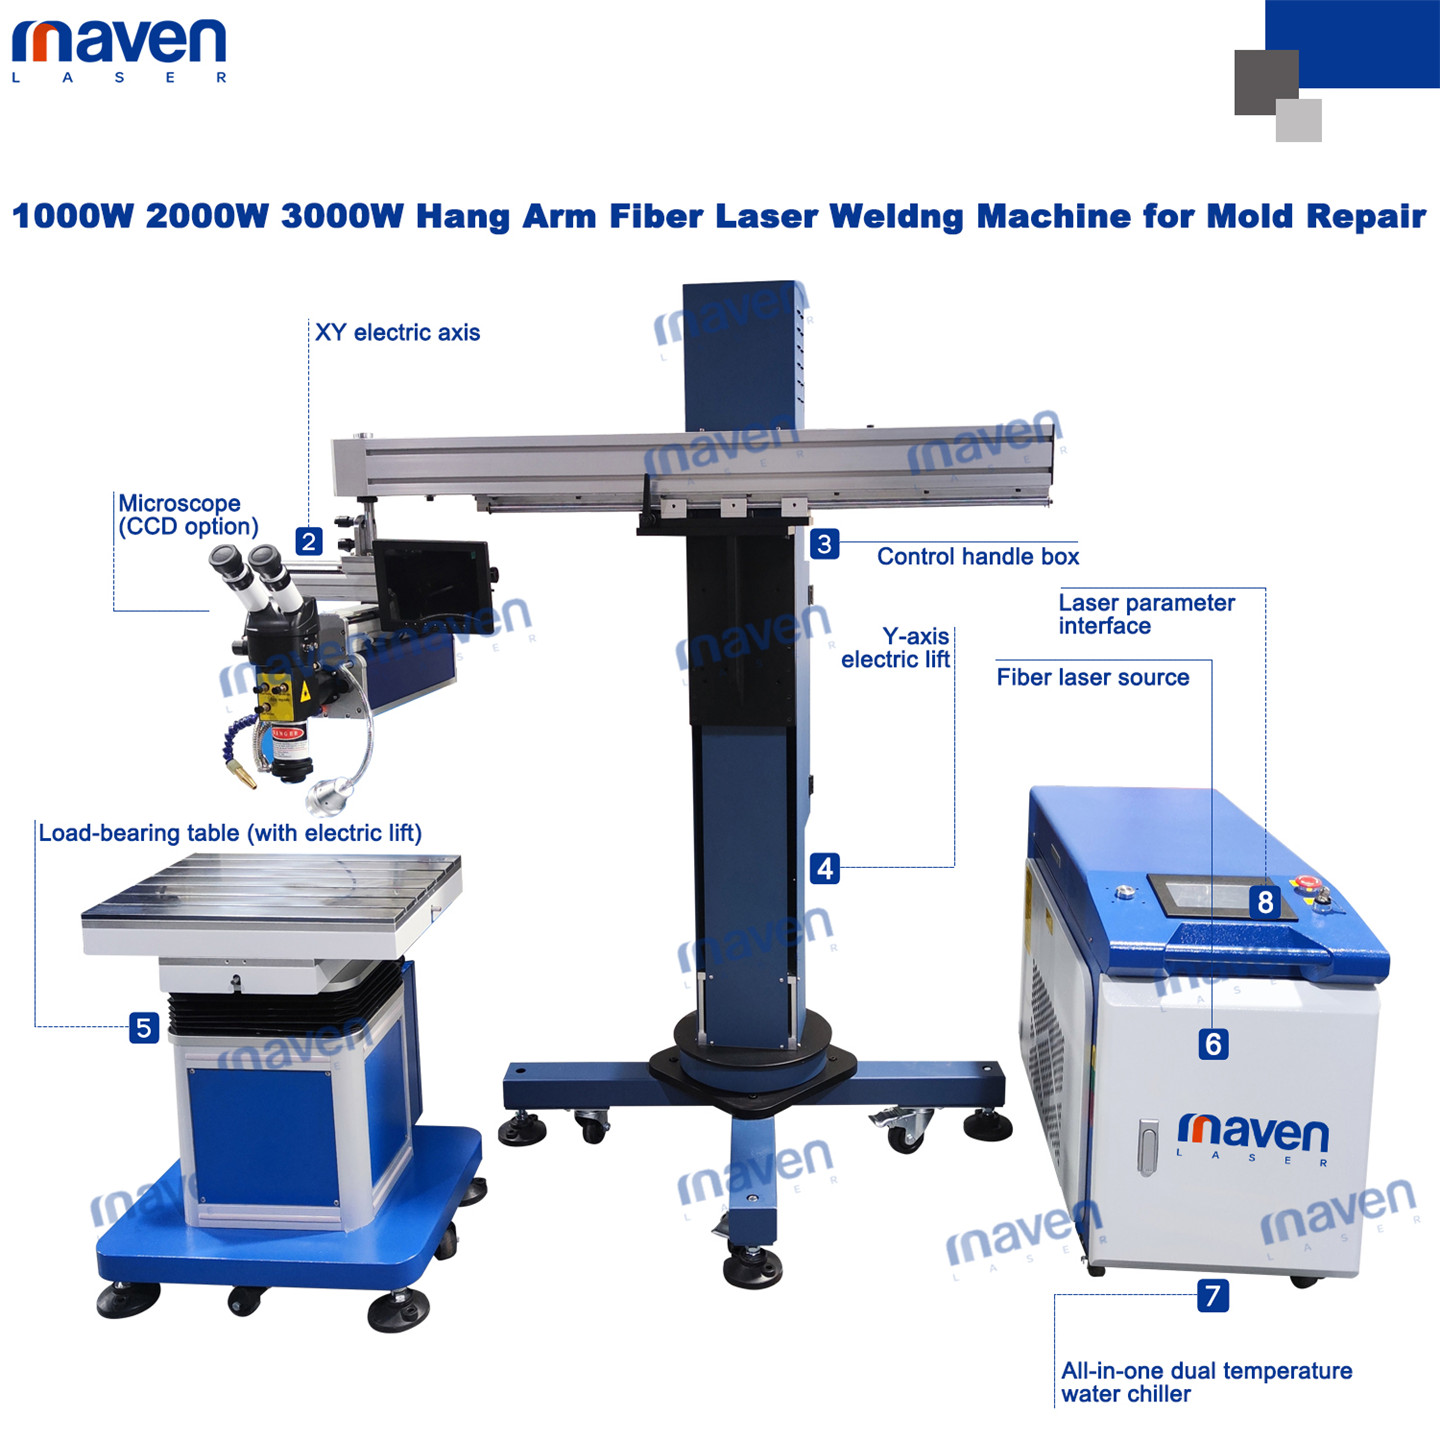 MavenLaser 1500W 2000W Cantilever Mould Laser Welder with Lifter Arm for Precision Mold (12)